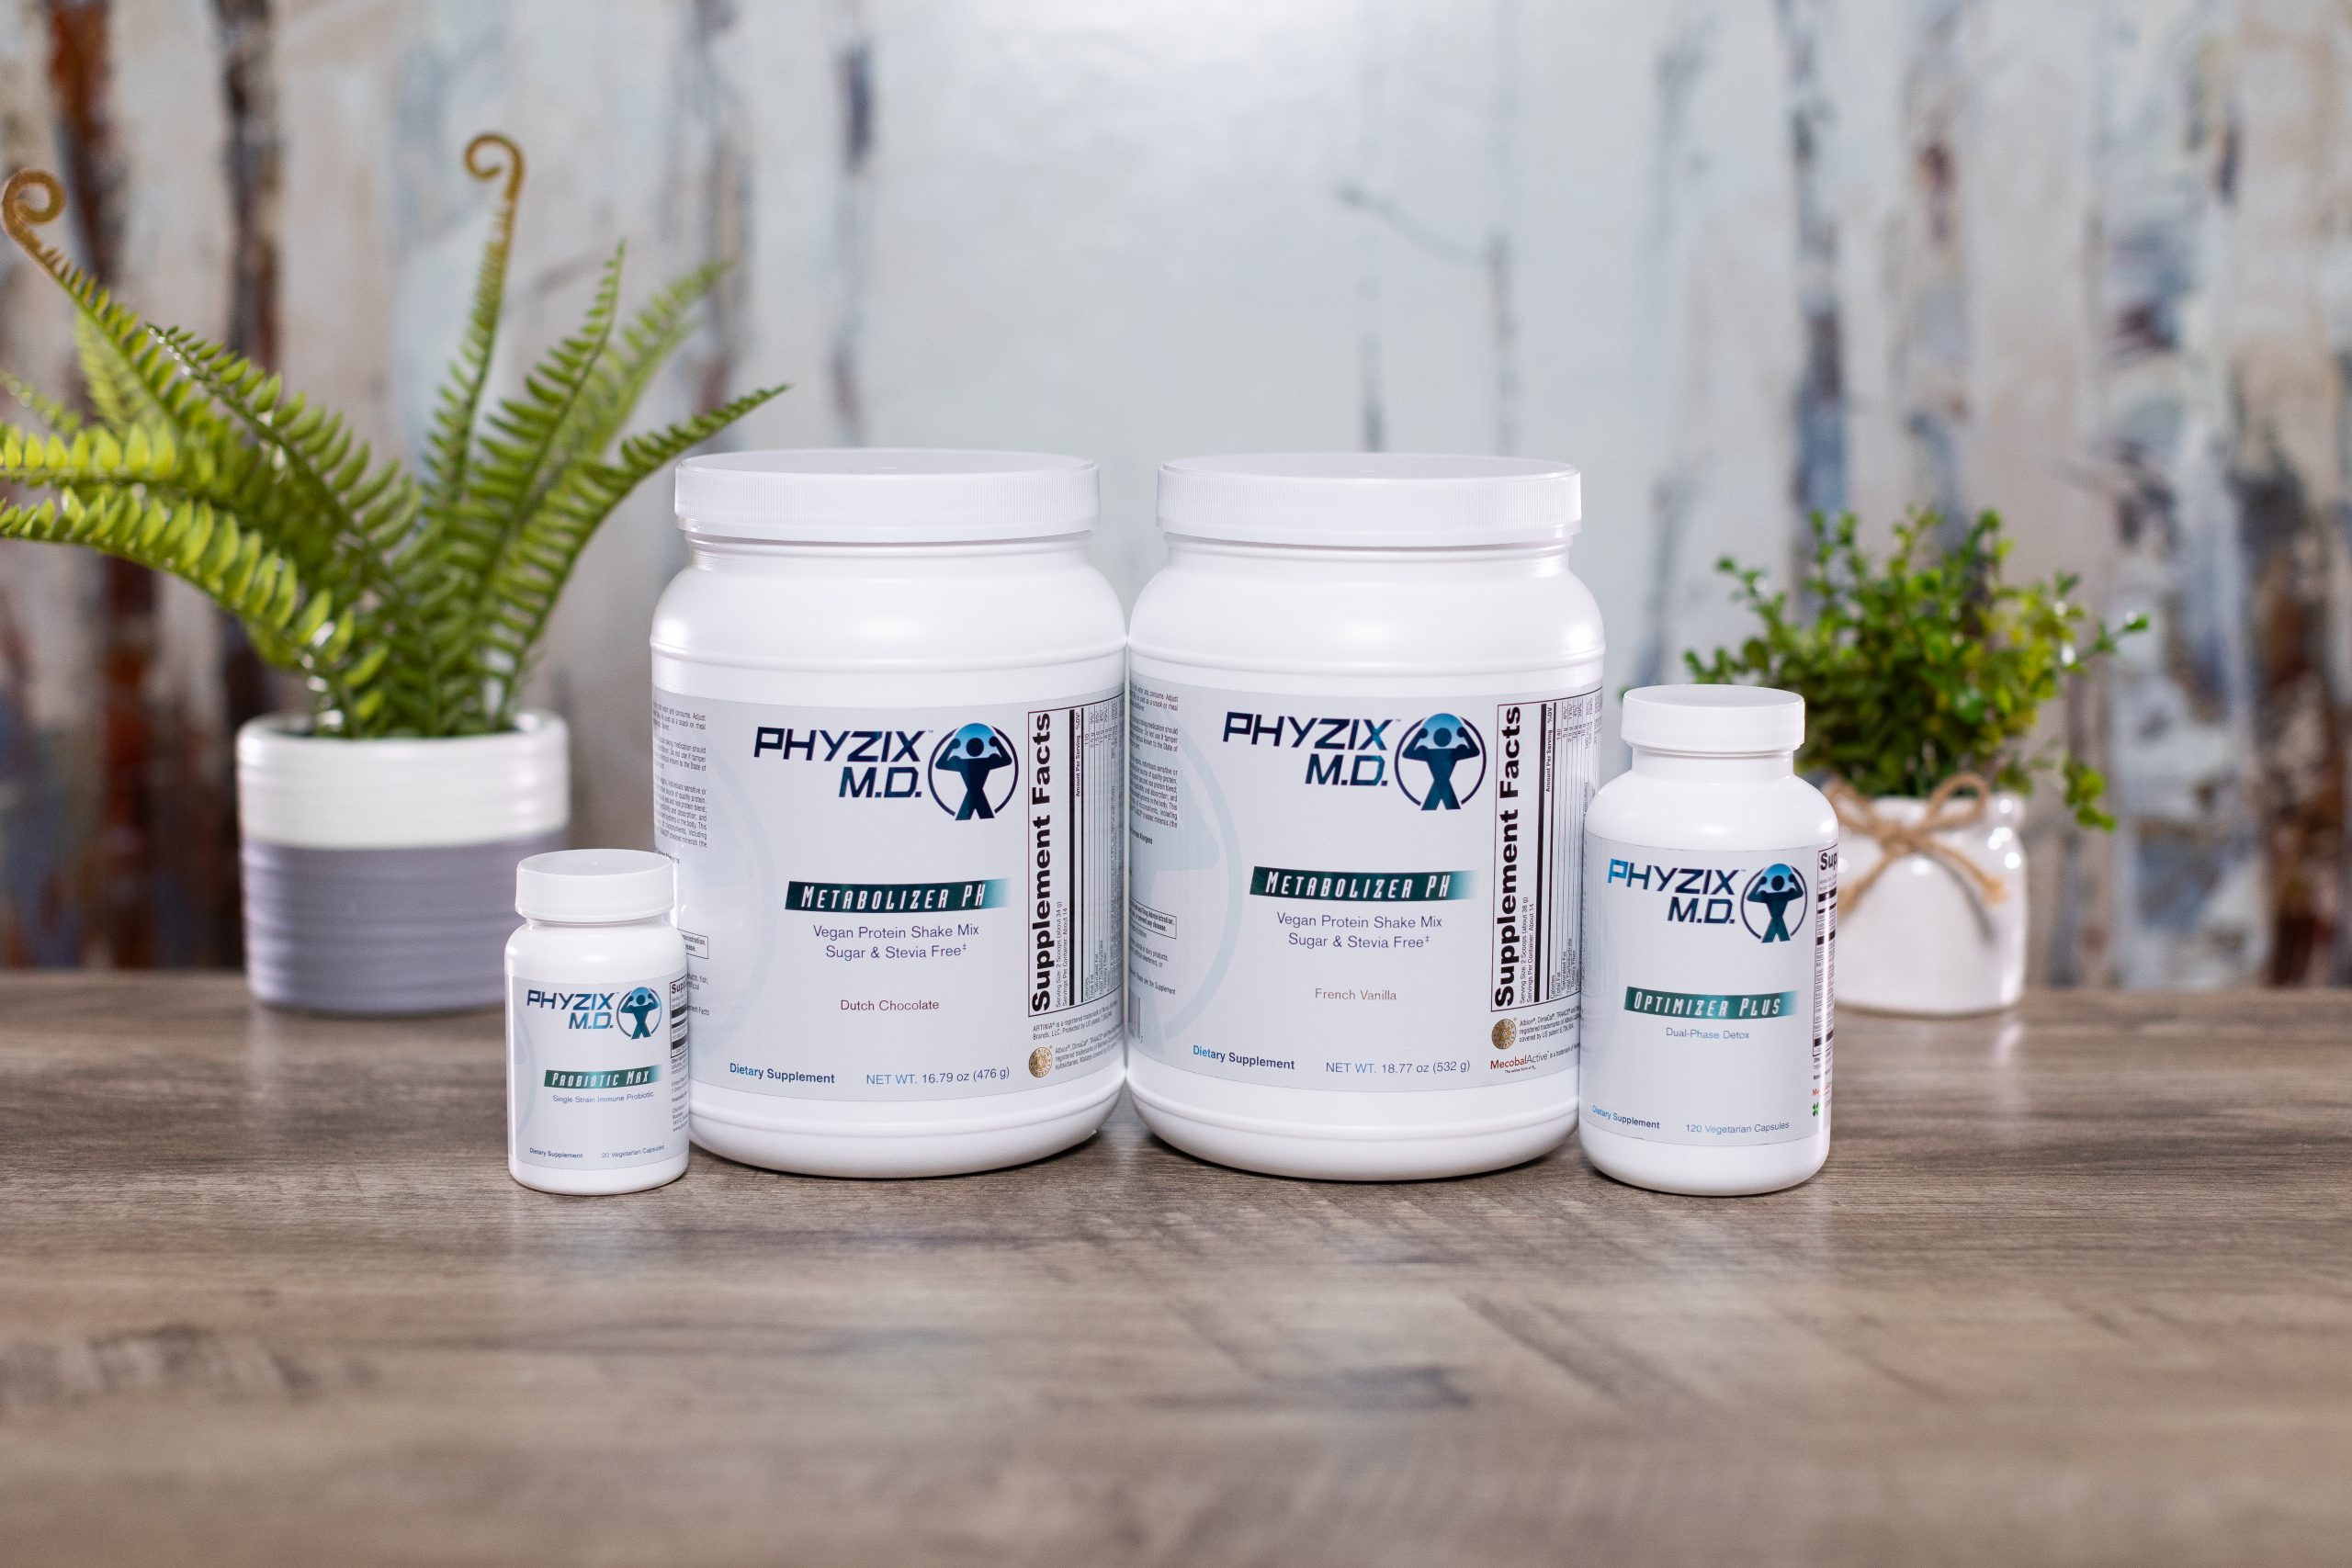 When Life Happens, the Phyzix MD Cleanse Can Get you Back on Track